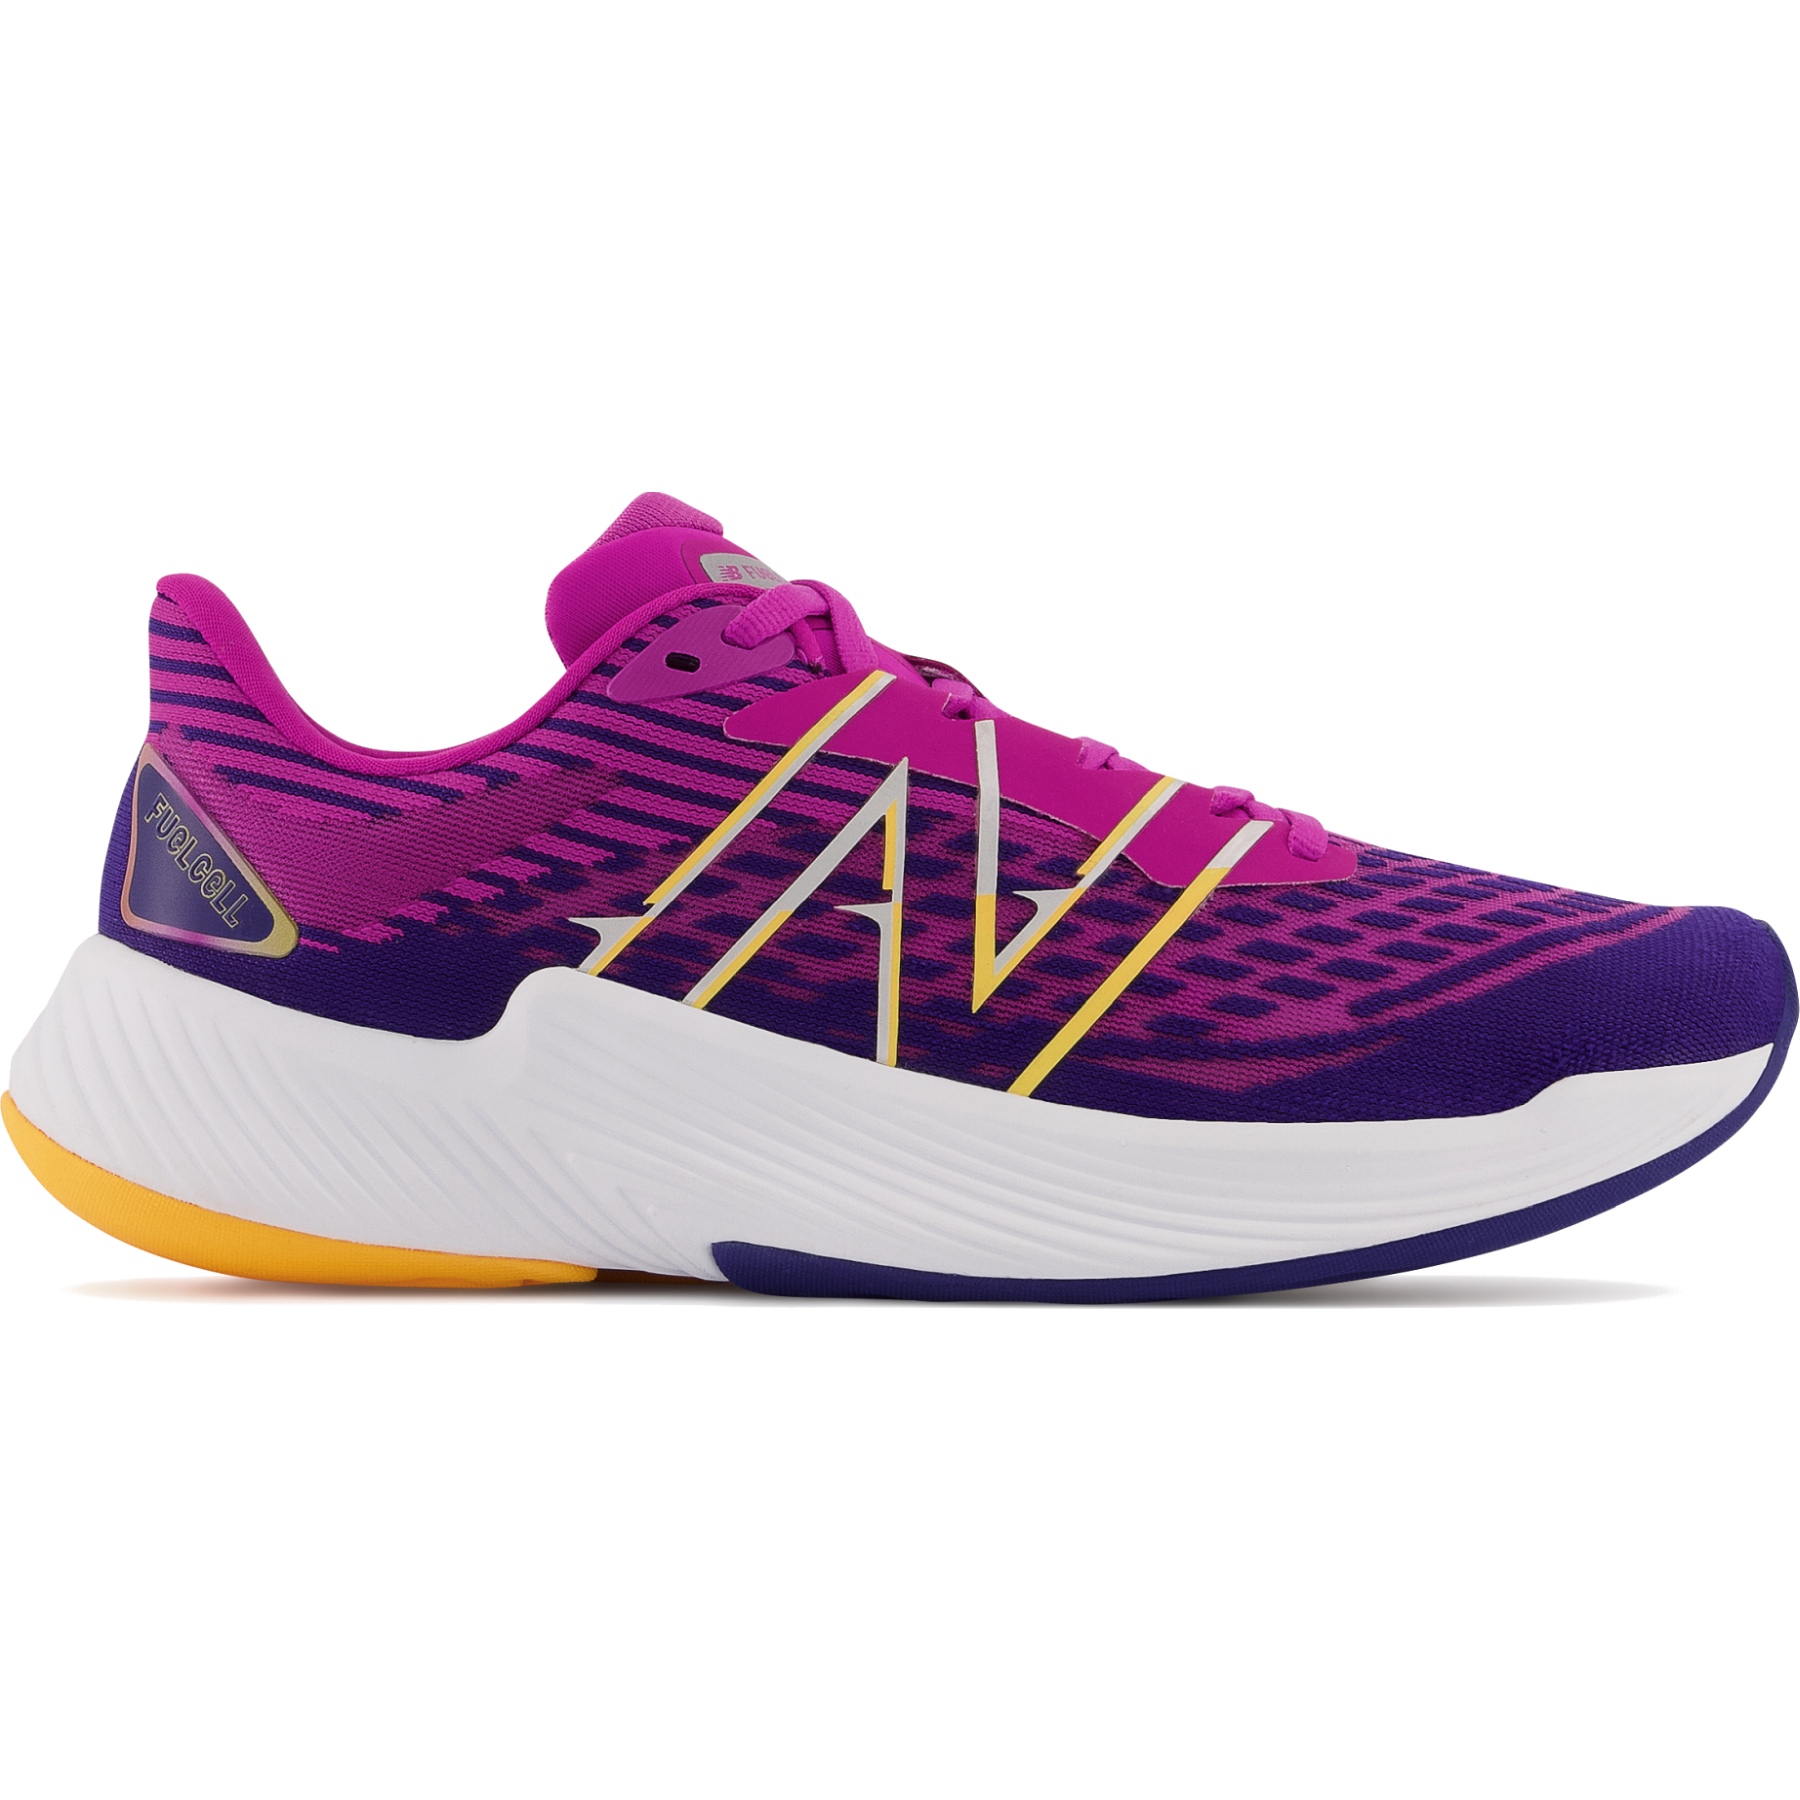 Productfoto van New Balance FuelCell Prism v2 Womens Running Shoes - Navy